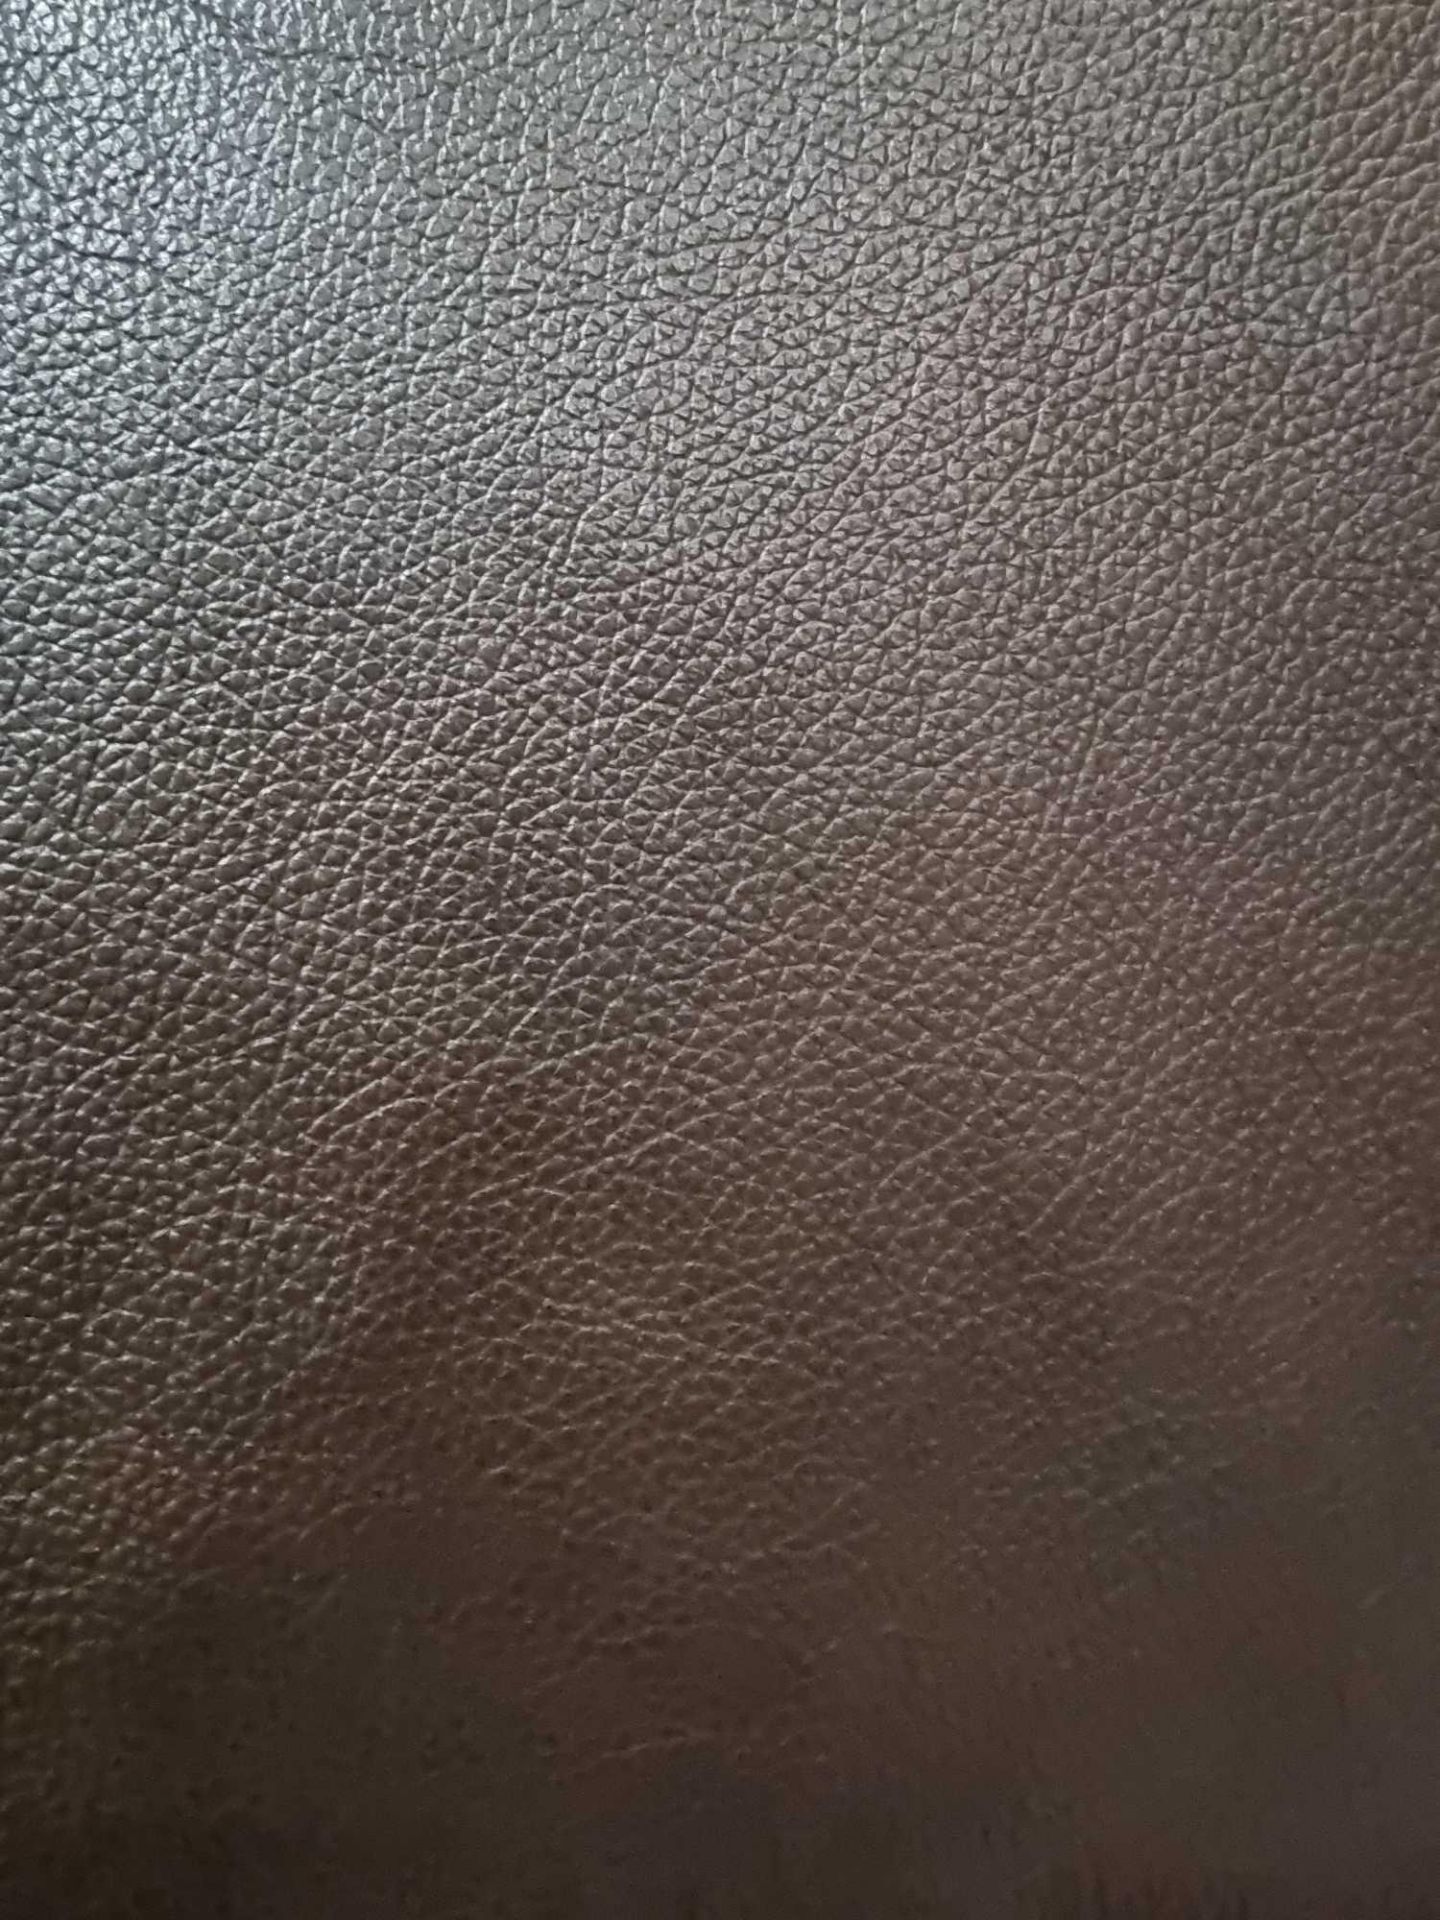 Chocolate Brown Leather Hide approximately 3 23M2 1 9 x 1 7cm ( Hide No,203)